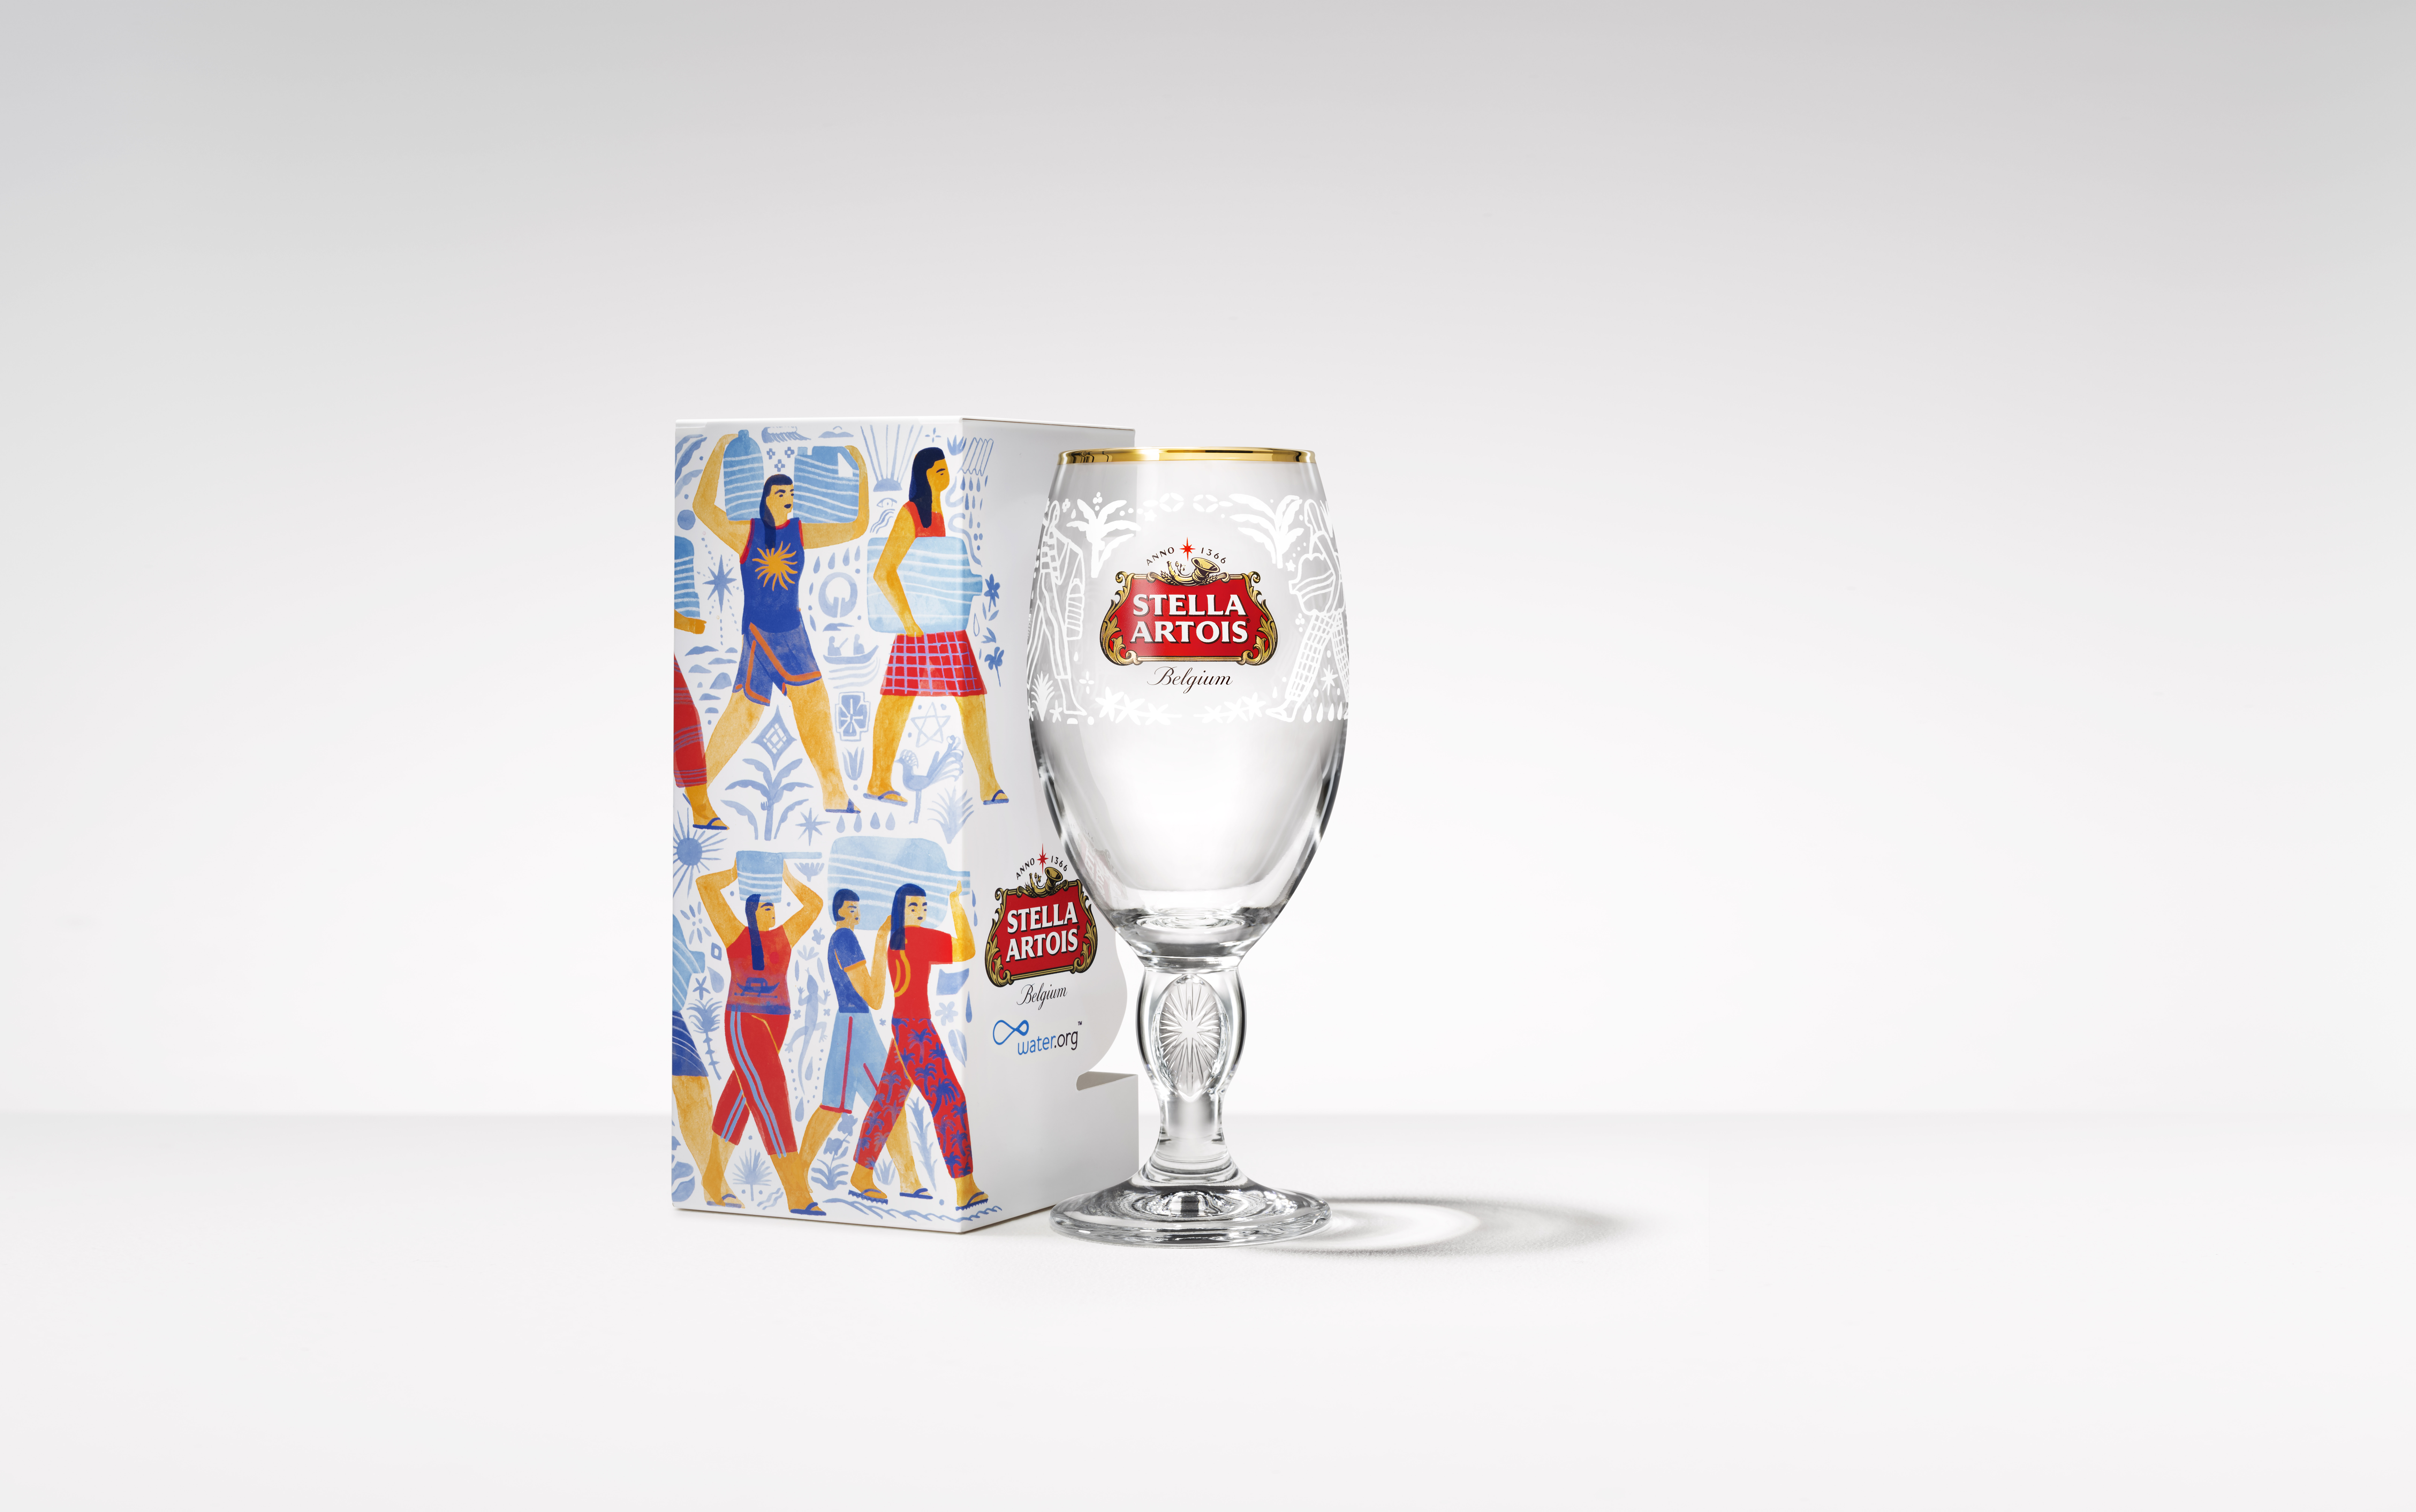 New Stella Artois Limited-Edition Chalice designed by Monica Ramos of the Philippines. The purchase of one Chalice helps Water.org provide five years of clean water to one person in the developing world.